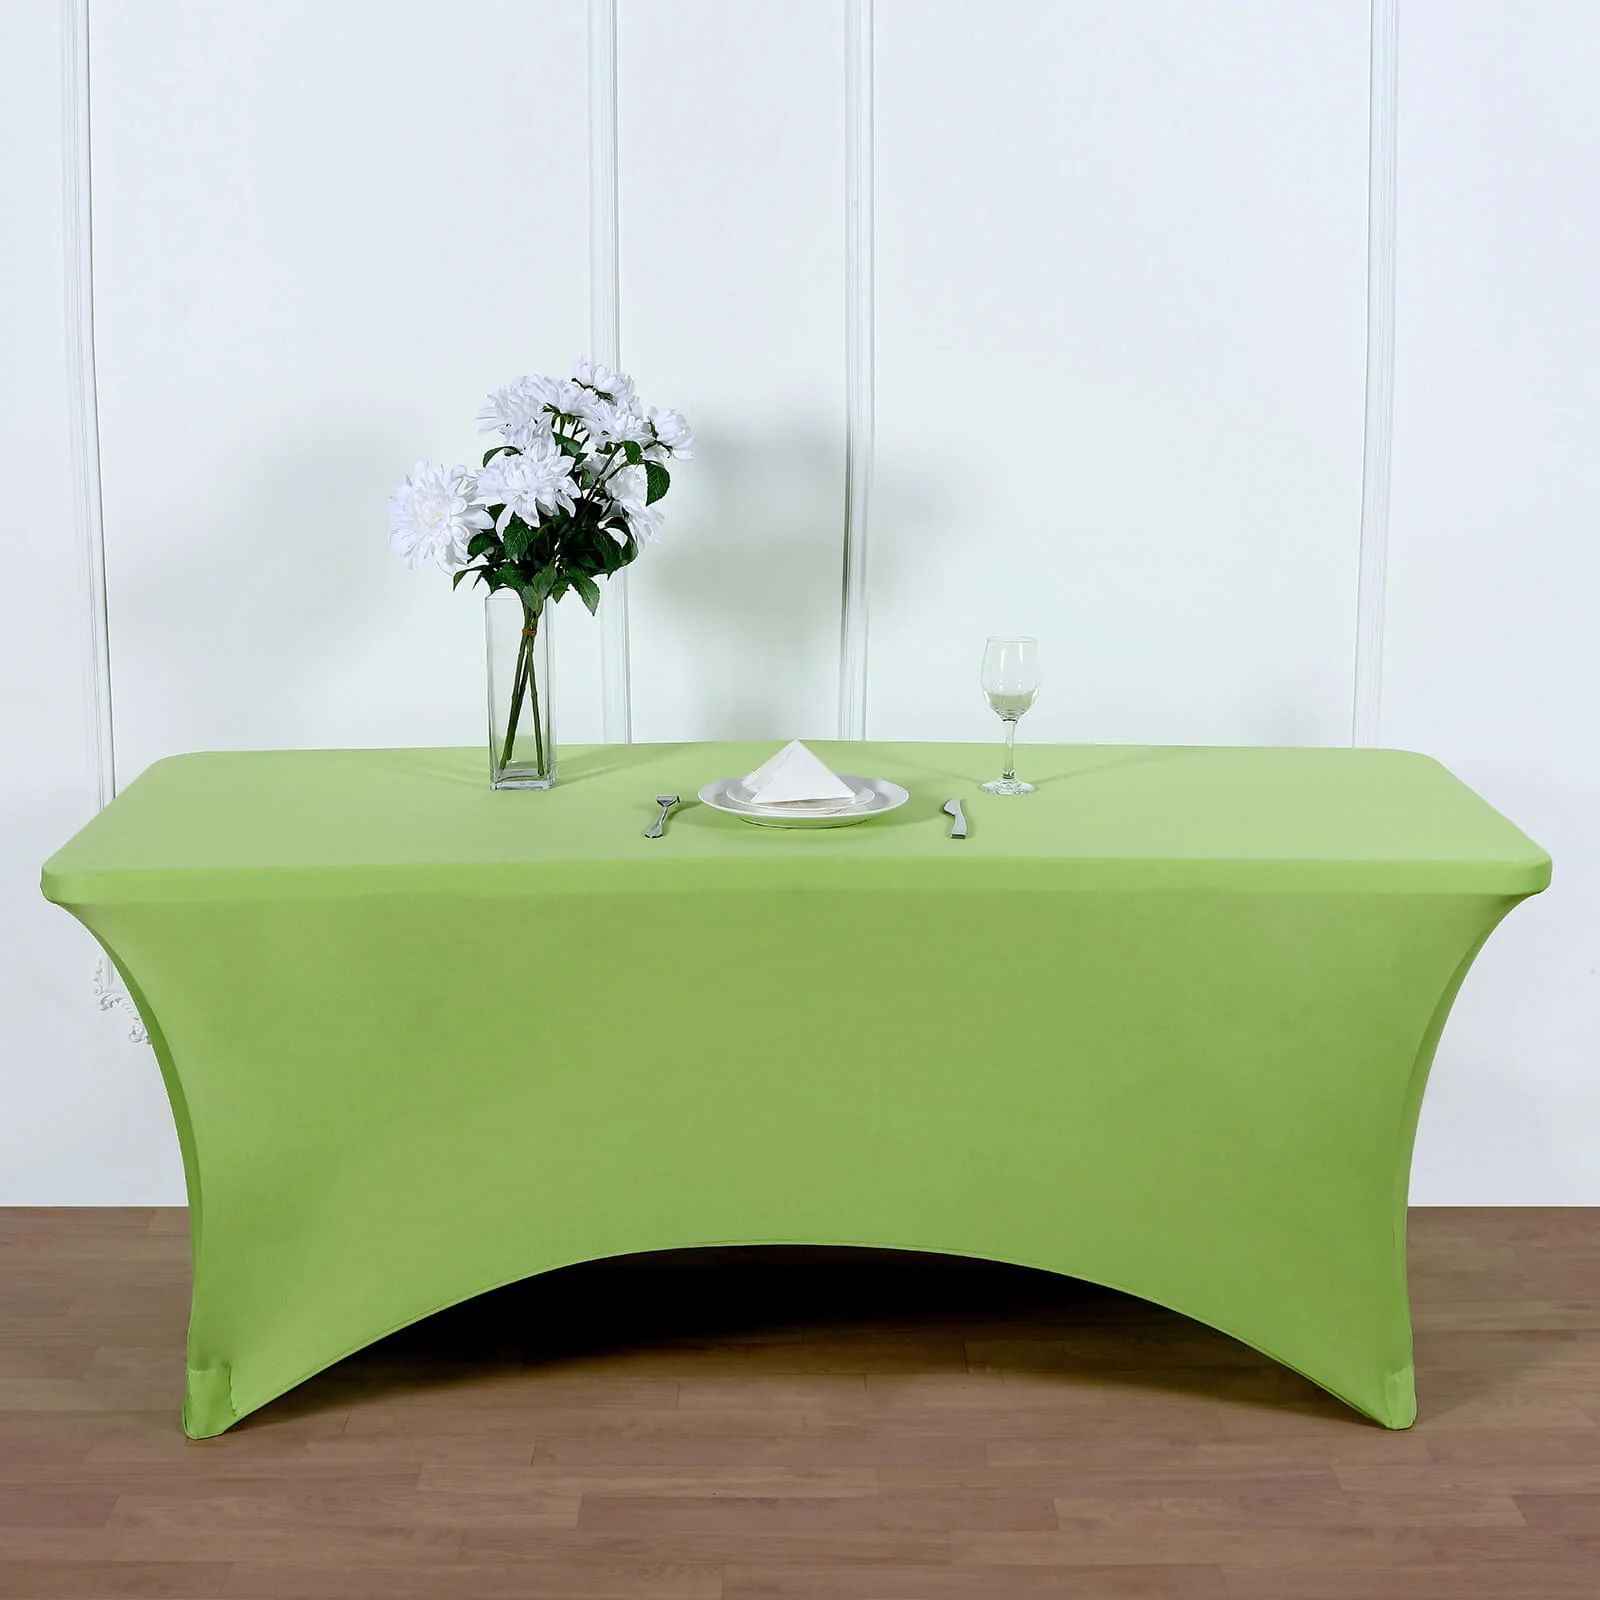 Apple Green - 6 Ft Rectangular Spandex Table Cover Wedding Party - £26.64 GBP